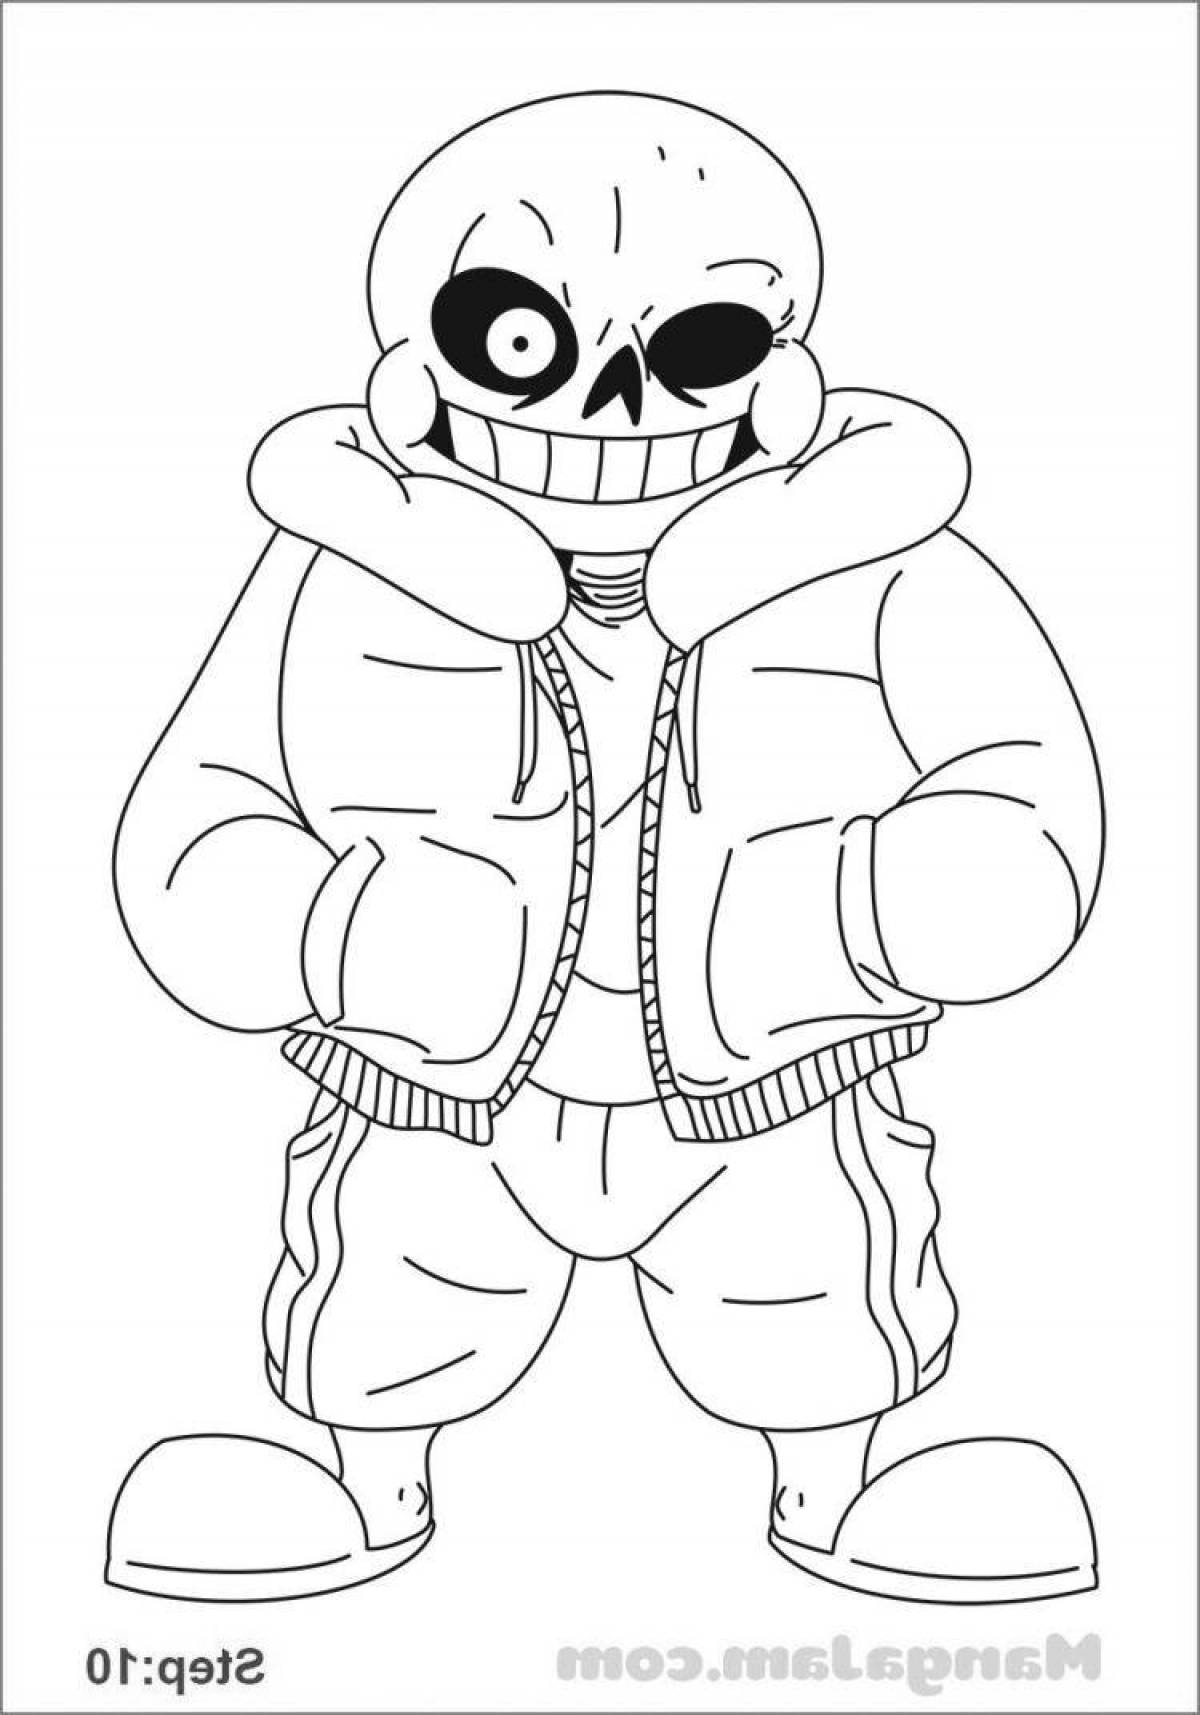 Fun undertail coloring by numbers